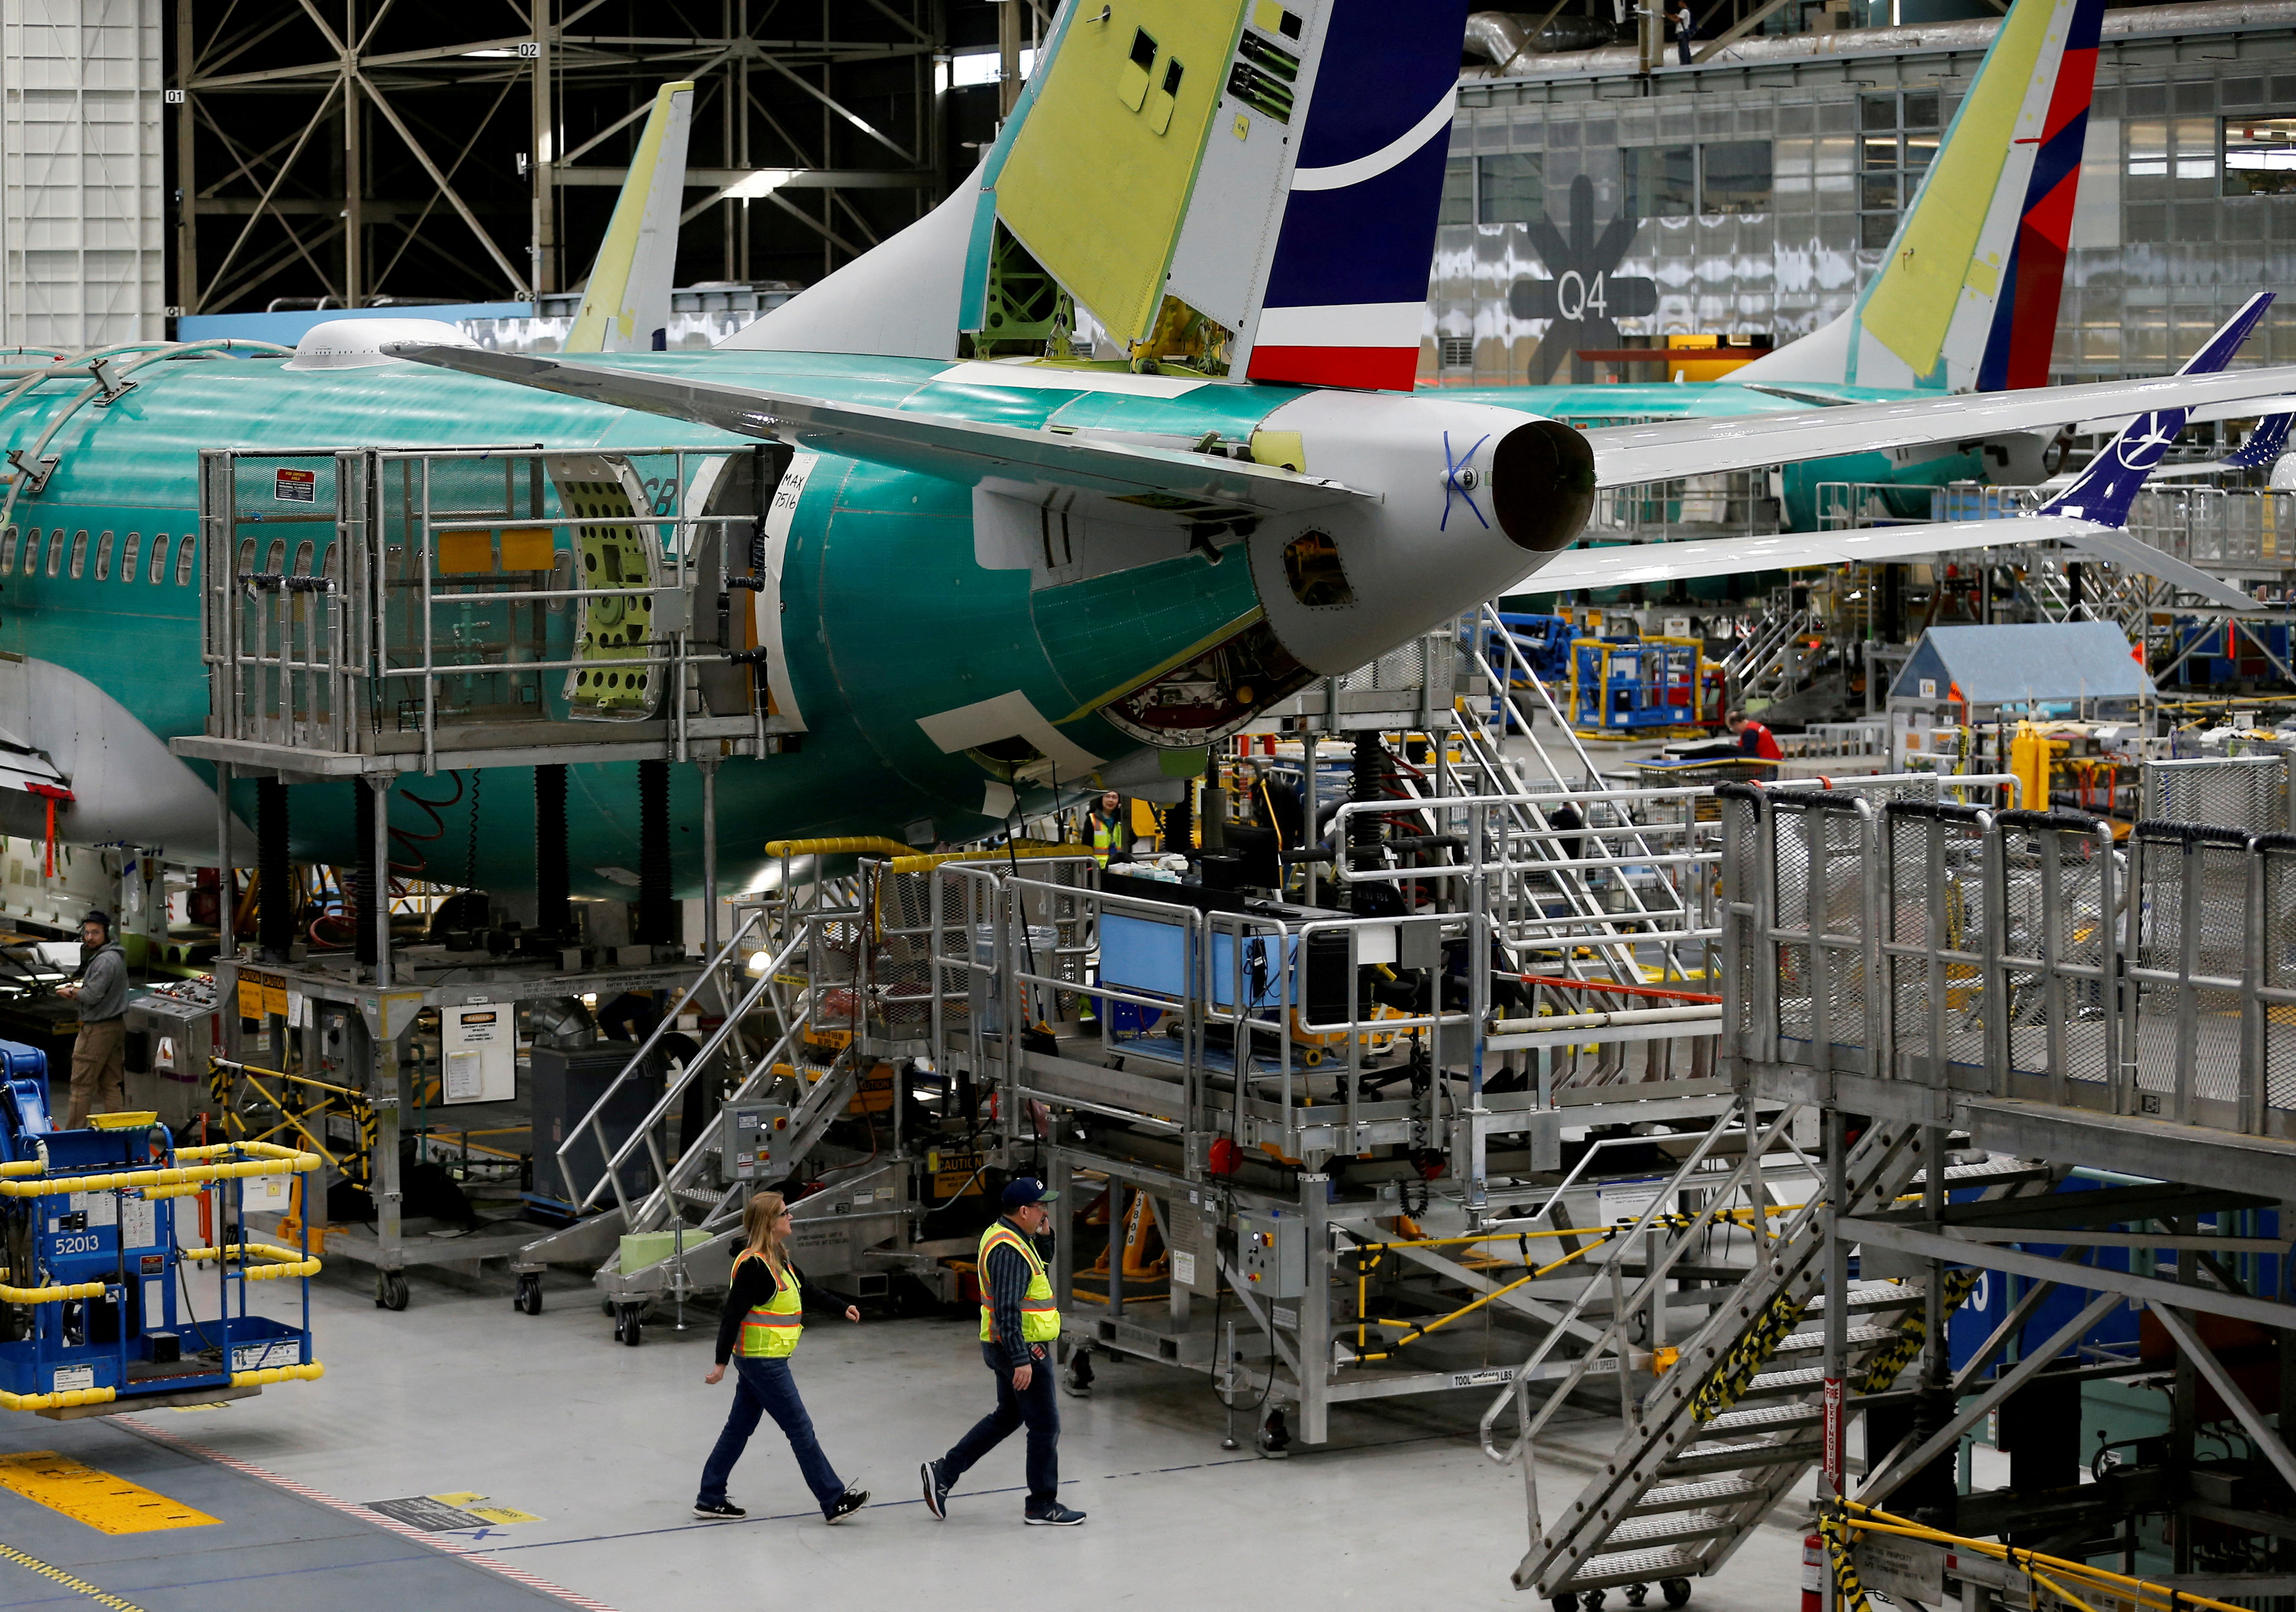 Employees walk by the end of a 737 Max aircraft at the Boeing factory in Renton